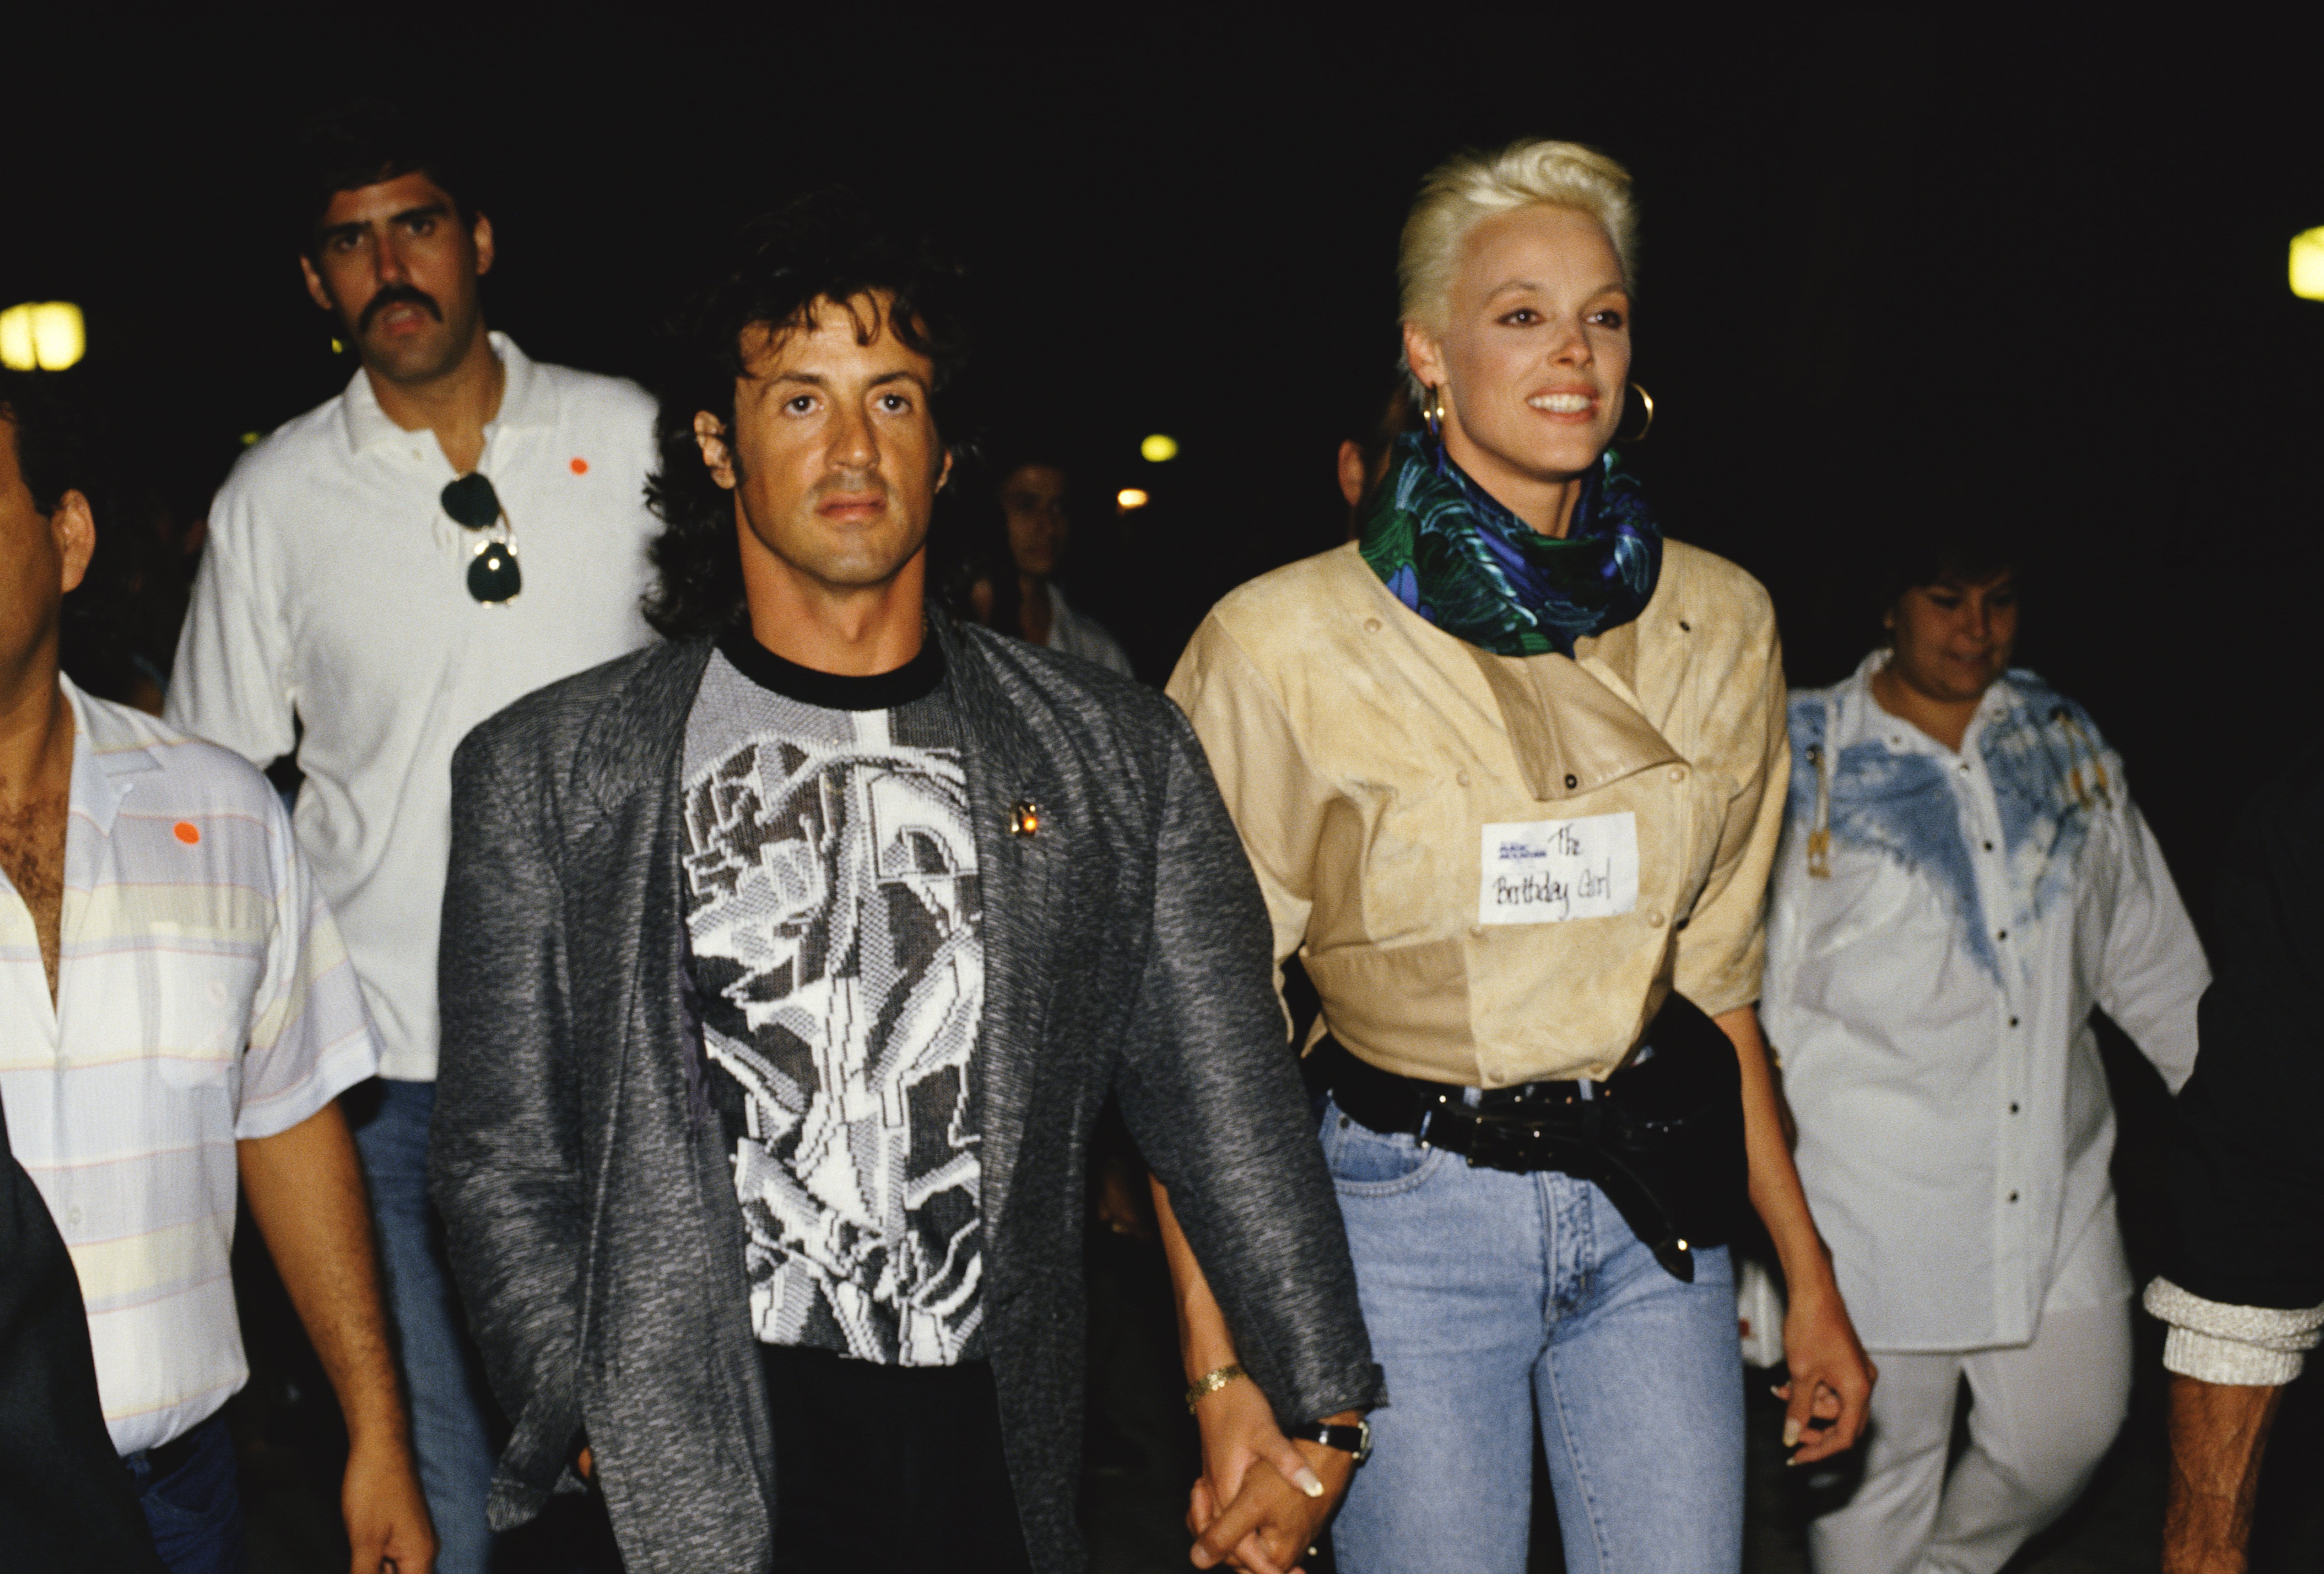 Sylvester Stallone and Brigitte Nielsen arriving at Demi Moore's 30th birthday party in Valencia | Source: Getty Images